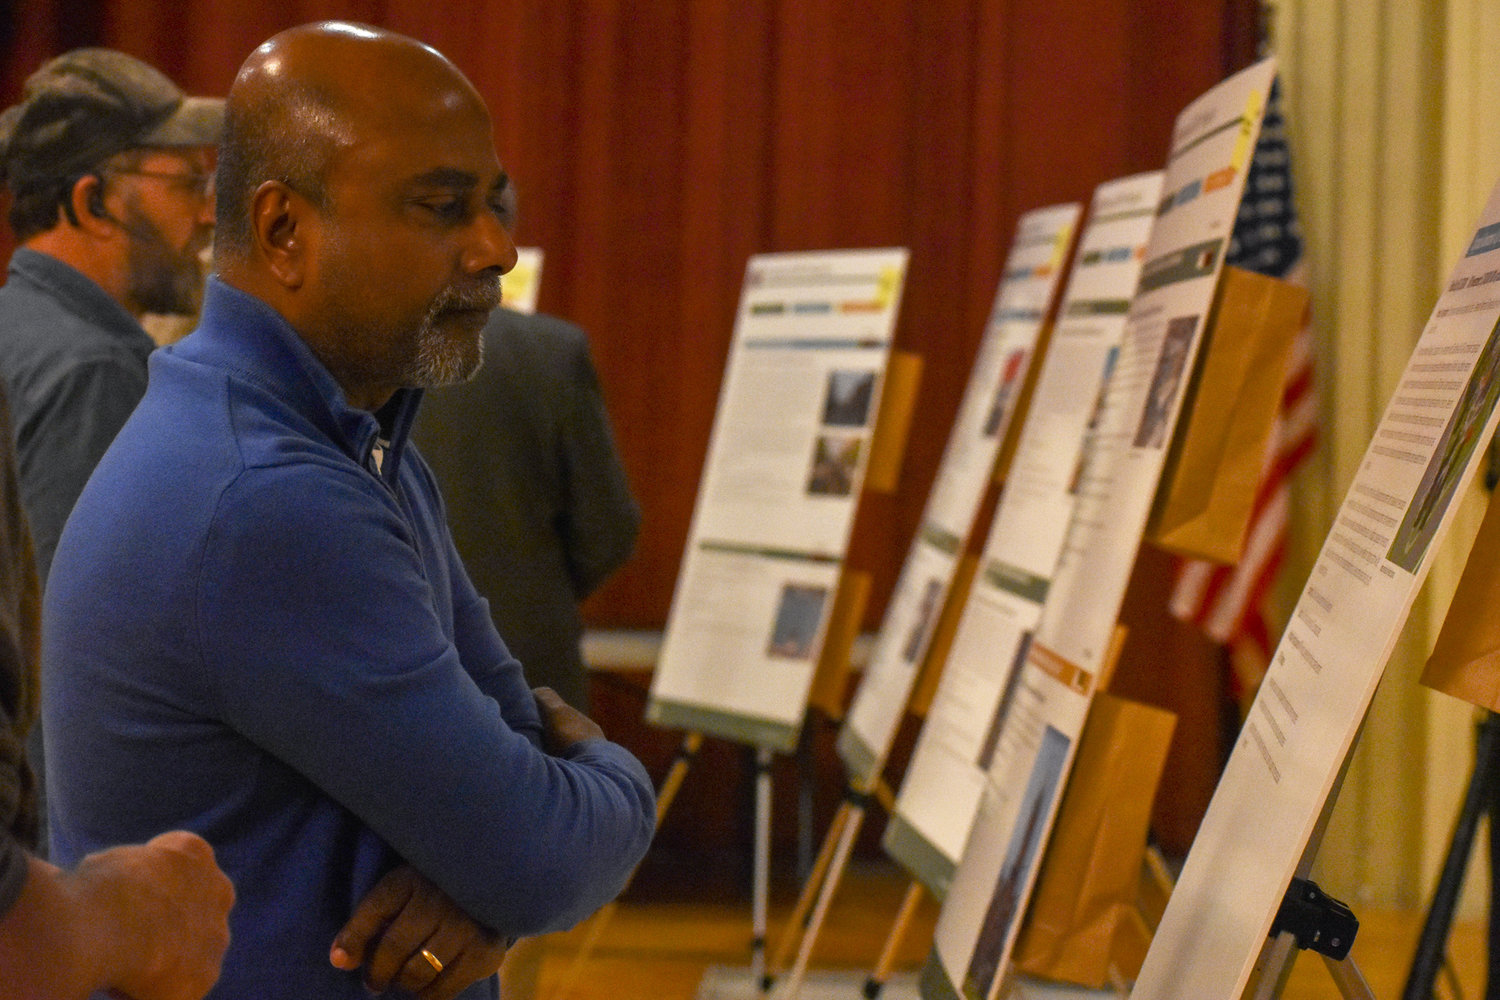 Proposed project profiles were available for viewing in the Kallet Theater during Oneida's second Downtown Revitalization Initiative (DRI) public comment meeting on Wednesday, May 18, 2022. Each project is being considered to receive funding through the DRI.